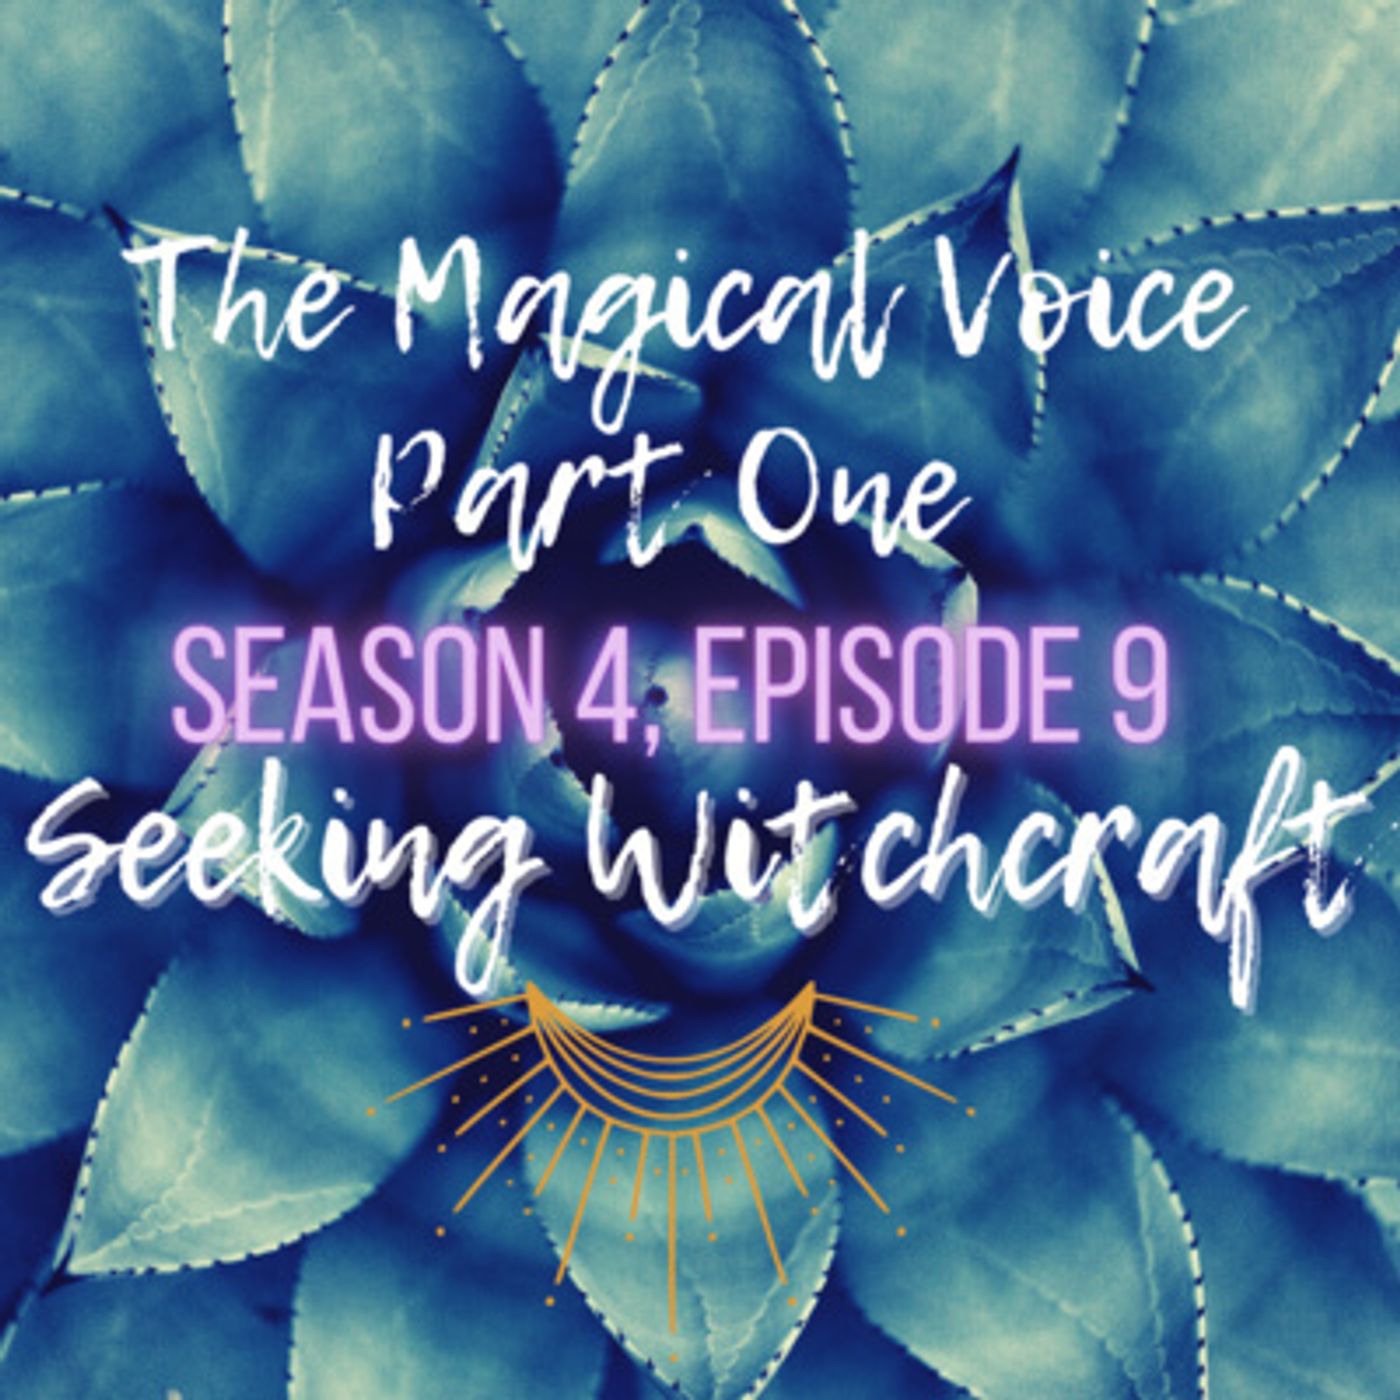 S4 Ep9: The Magical Voice - Part 1